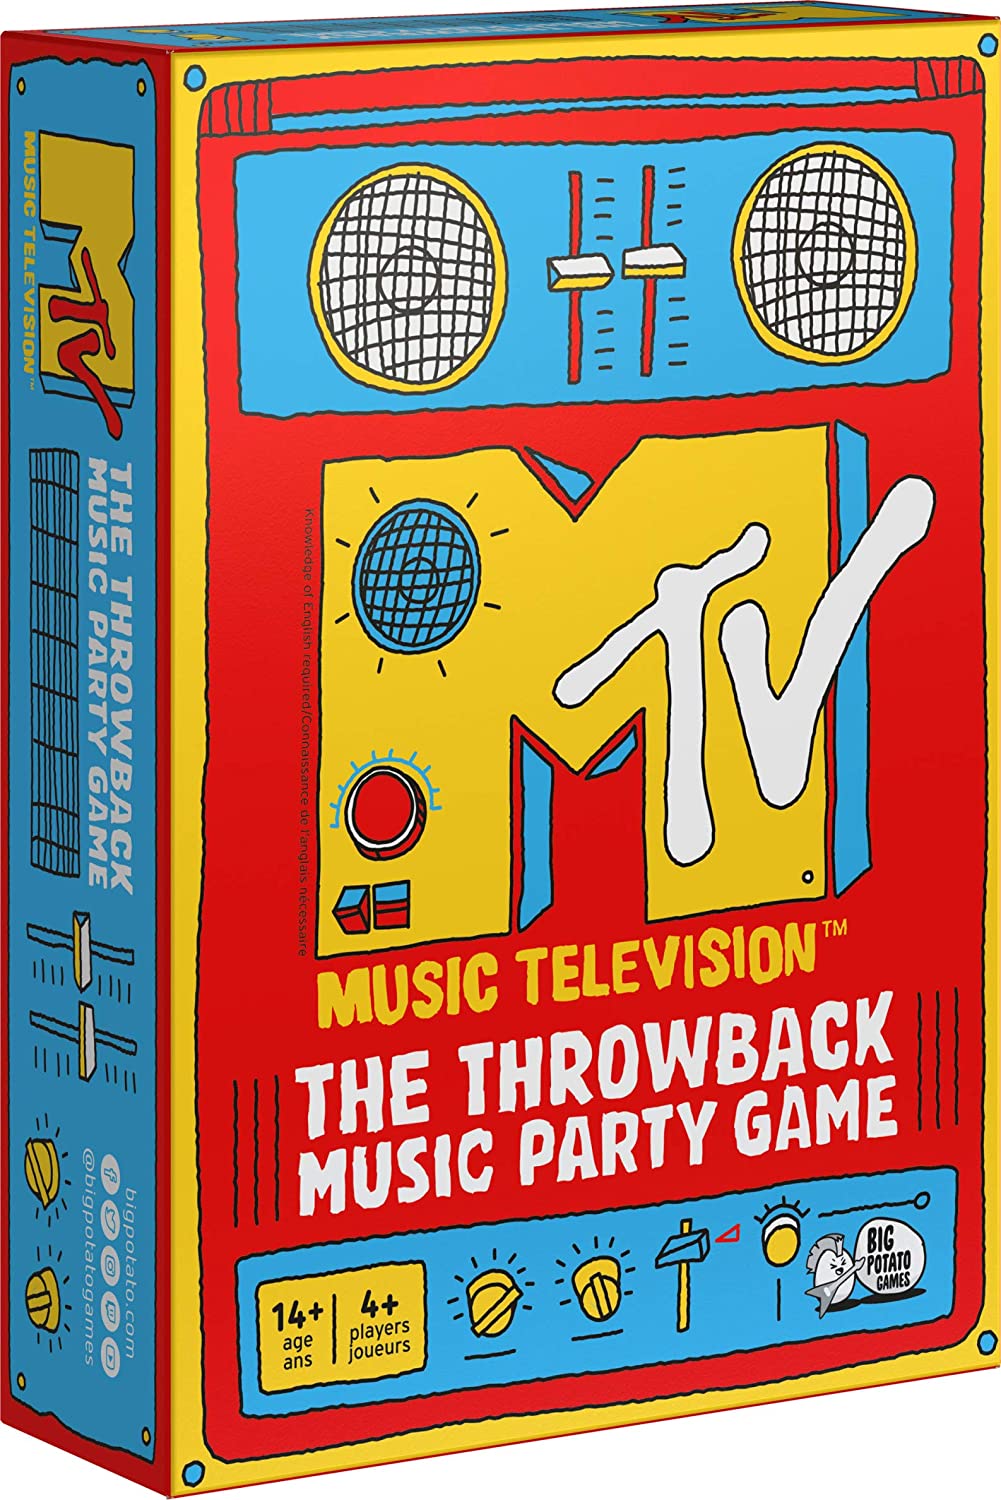 MTV THE THROWBACK MUSIC PARTY